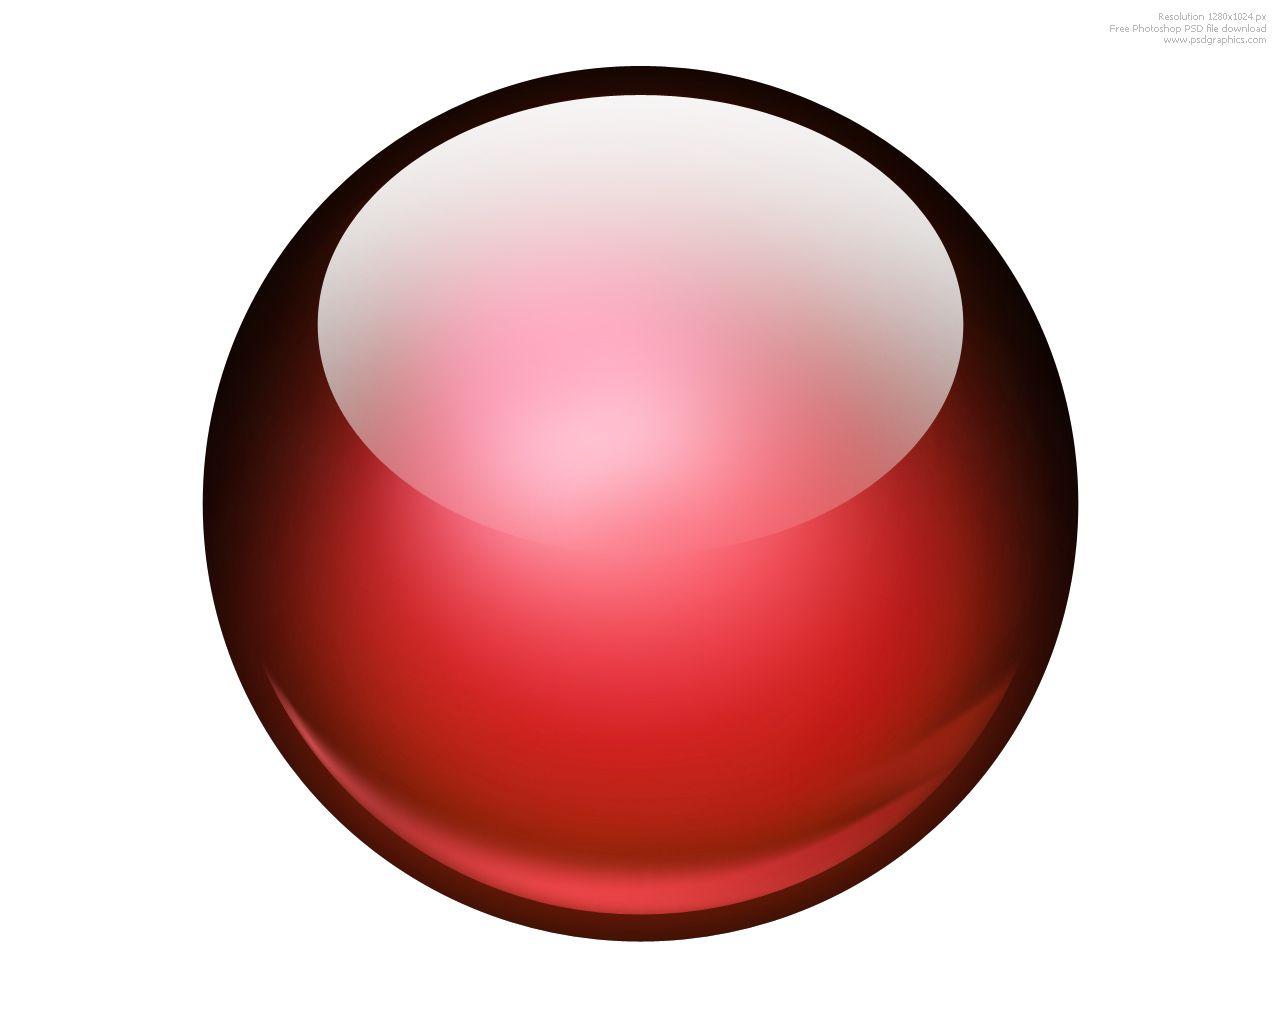 Red Sphere Logo - Free Sphere Icon 233174 | Download Sphere Icon - 233174